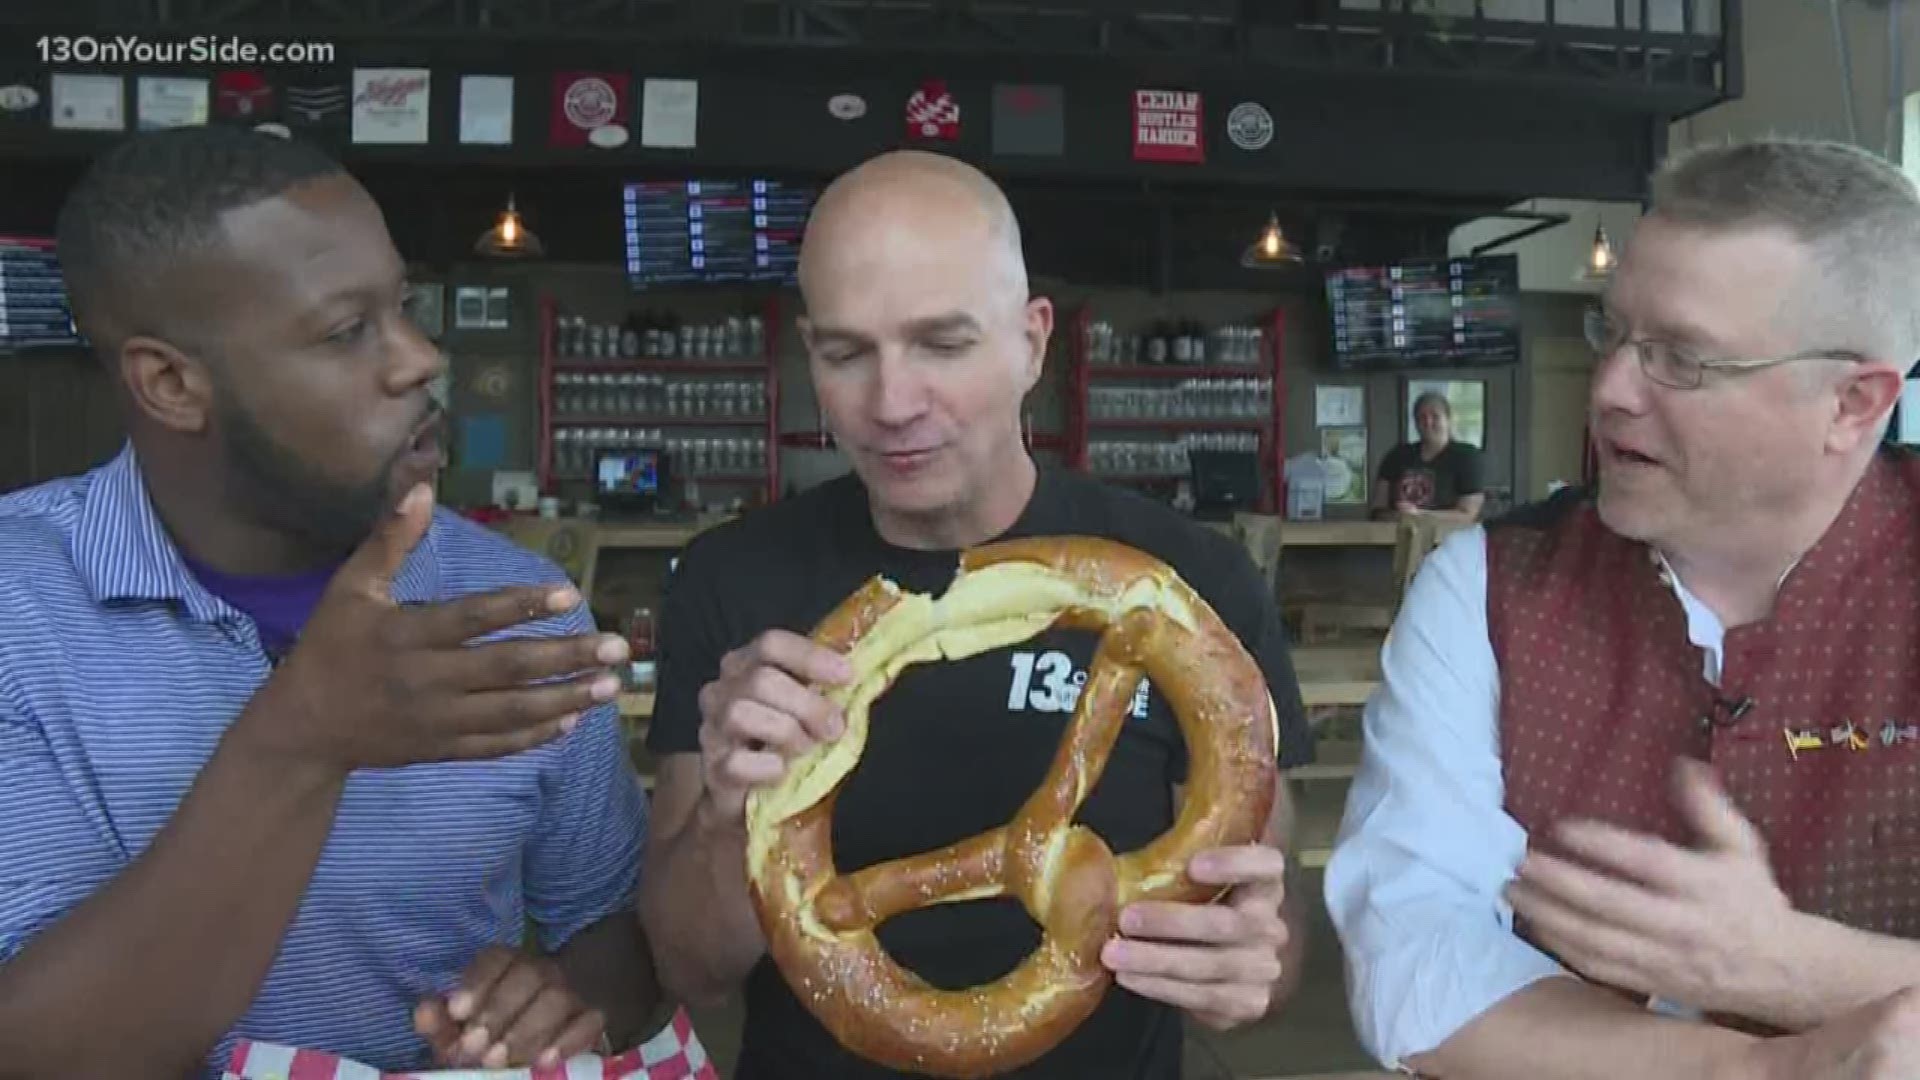 In this edition of Let's Eat, James Starks and Dave Kaechele check out Cedar Springs Brewery.